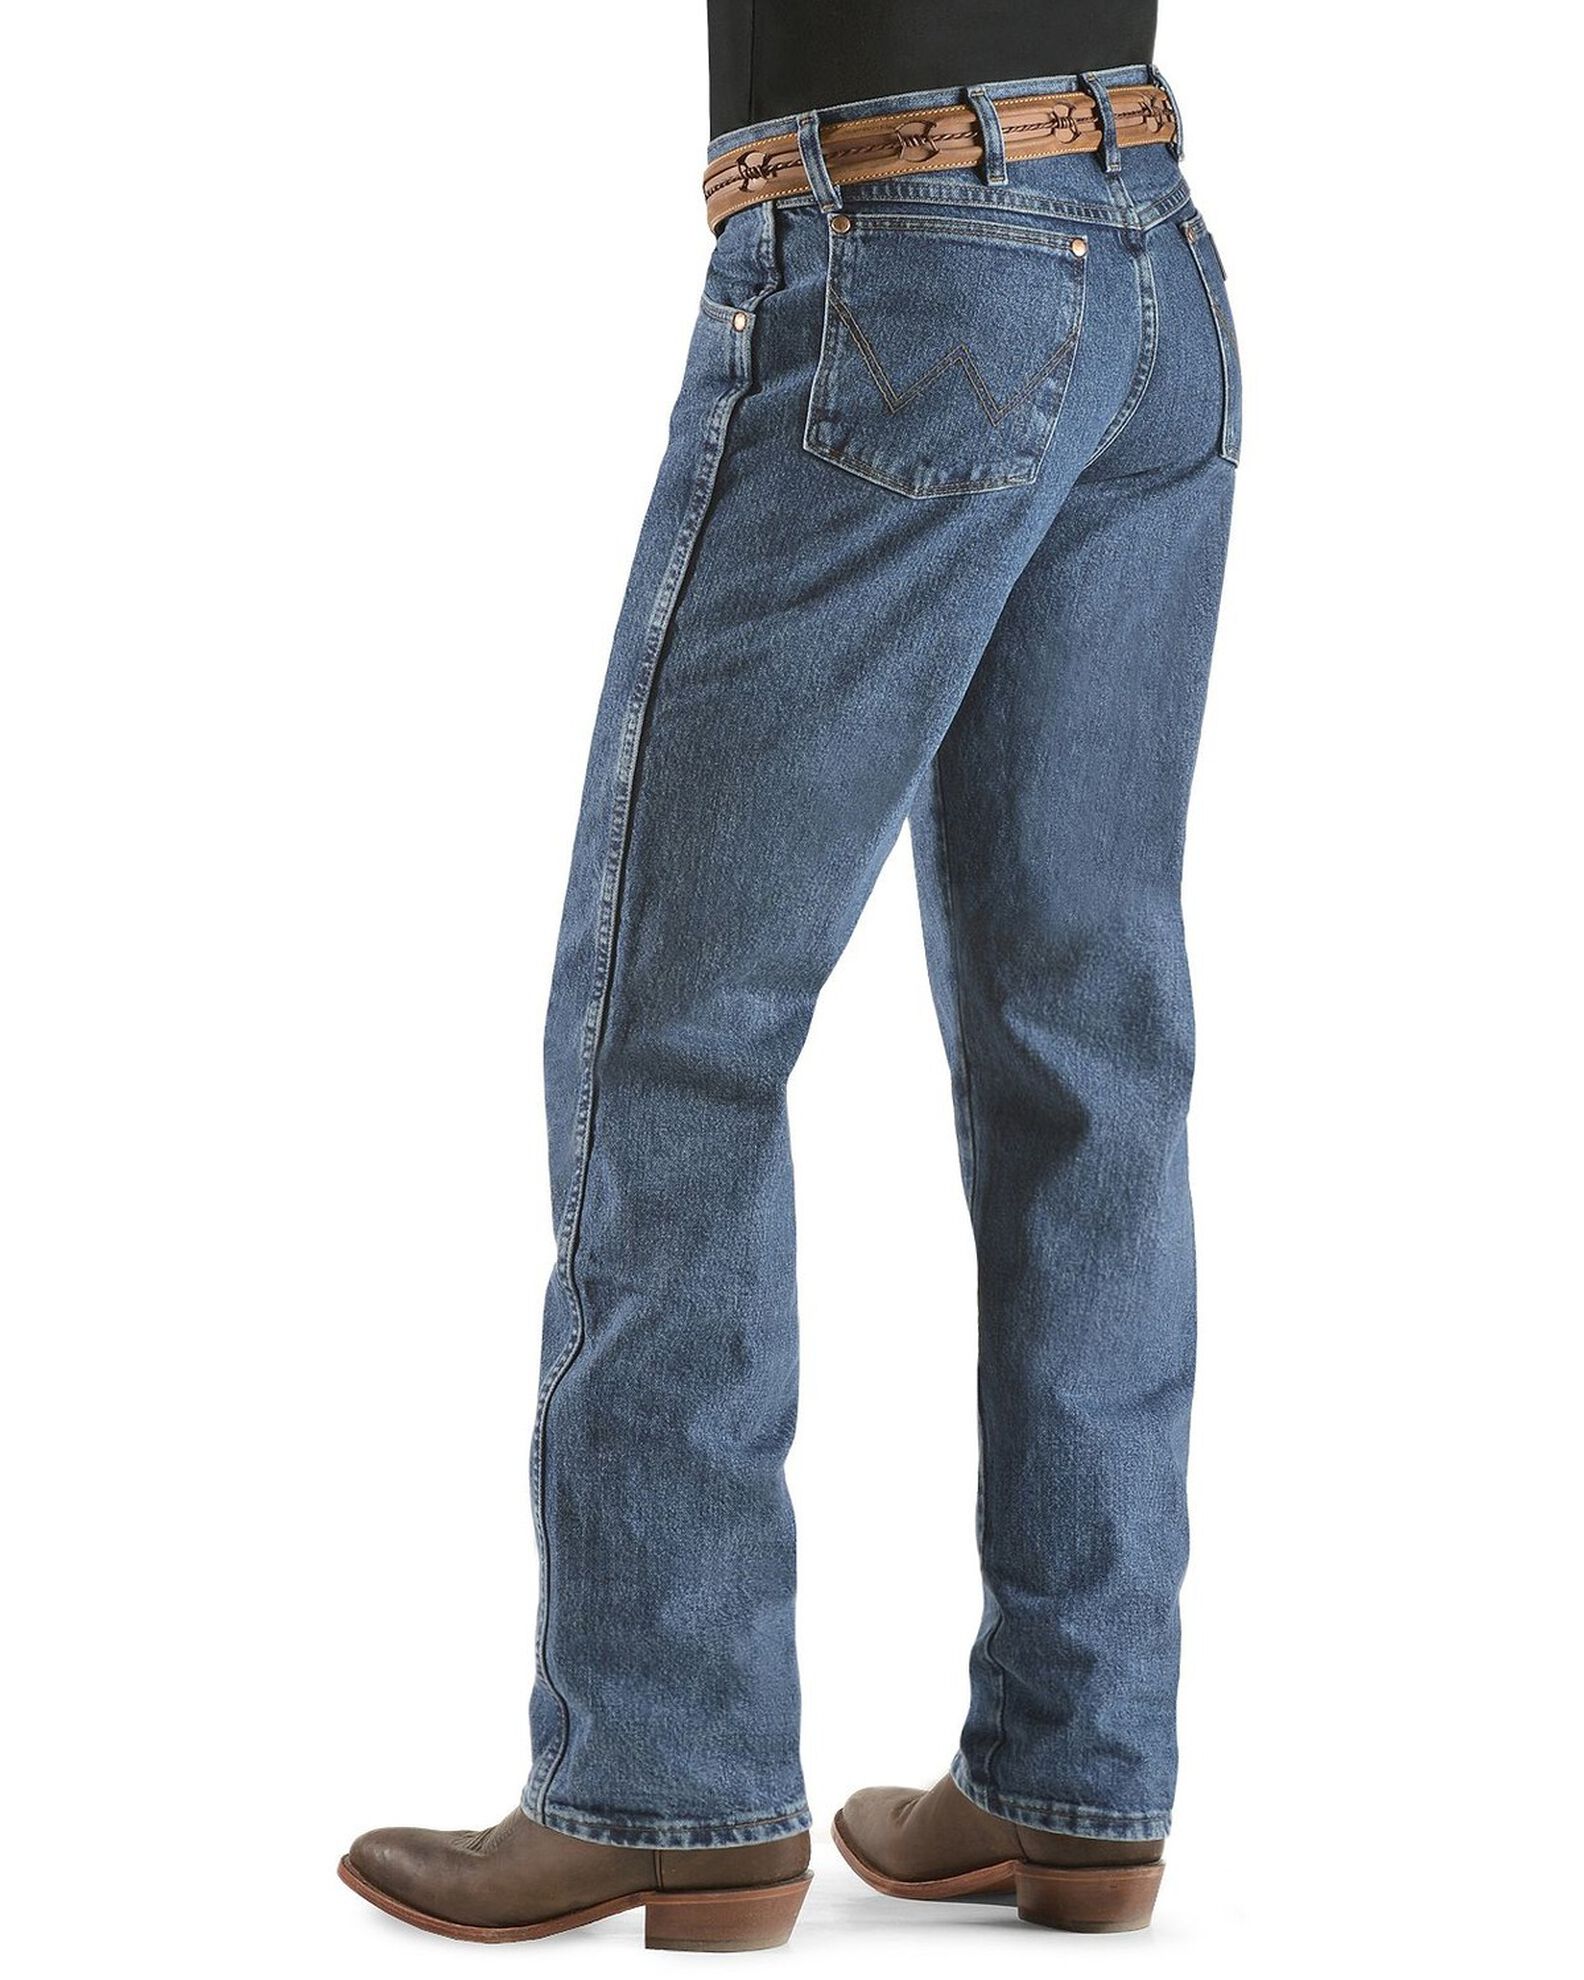 Wrangler 31MWZ Cowboy Cut Relaxed Fit Jeans